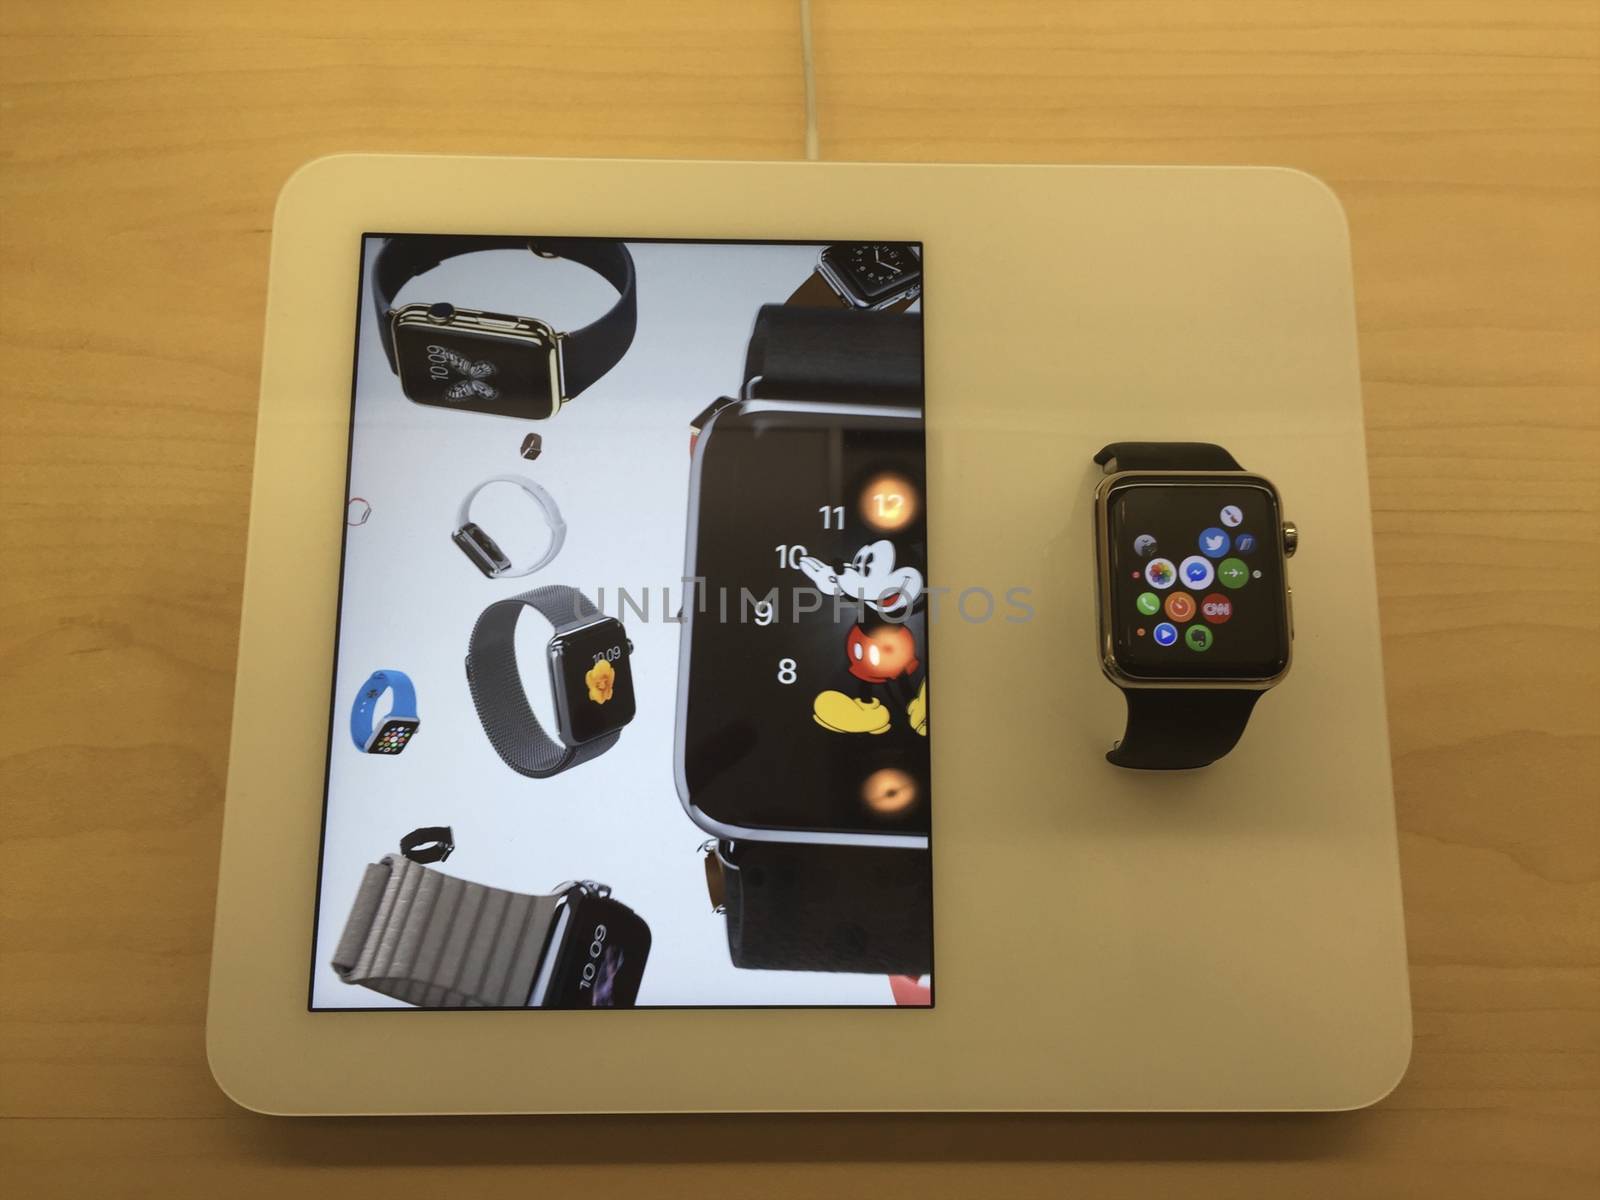 Apple sport watch displayed and video in store.

NEW YORK,  UNITED STATES AMERICA - APR 25 2015: New Apple Watch smartwatch displaying inside a glass cabinet, New York, USA